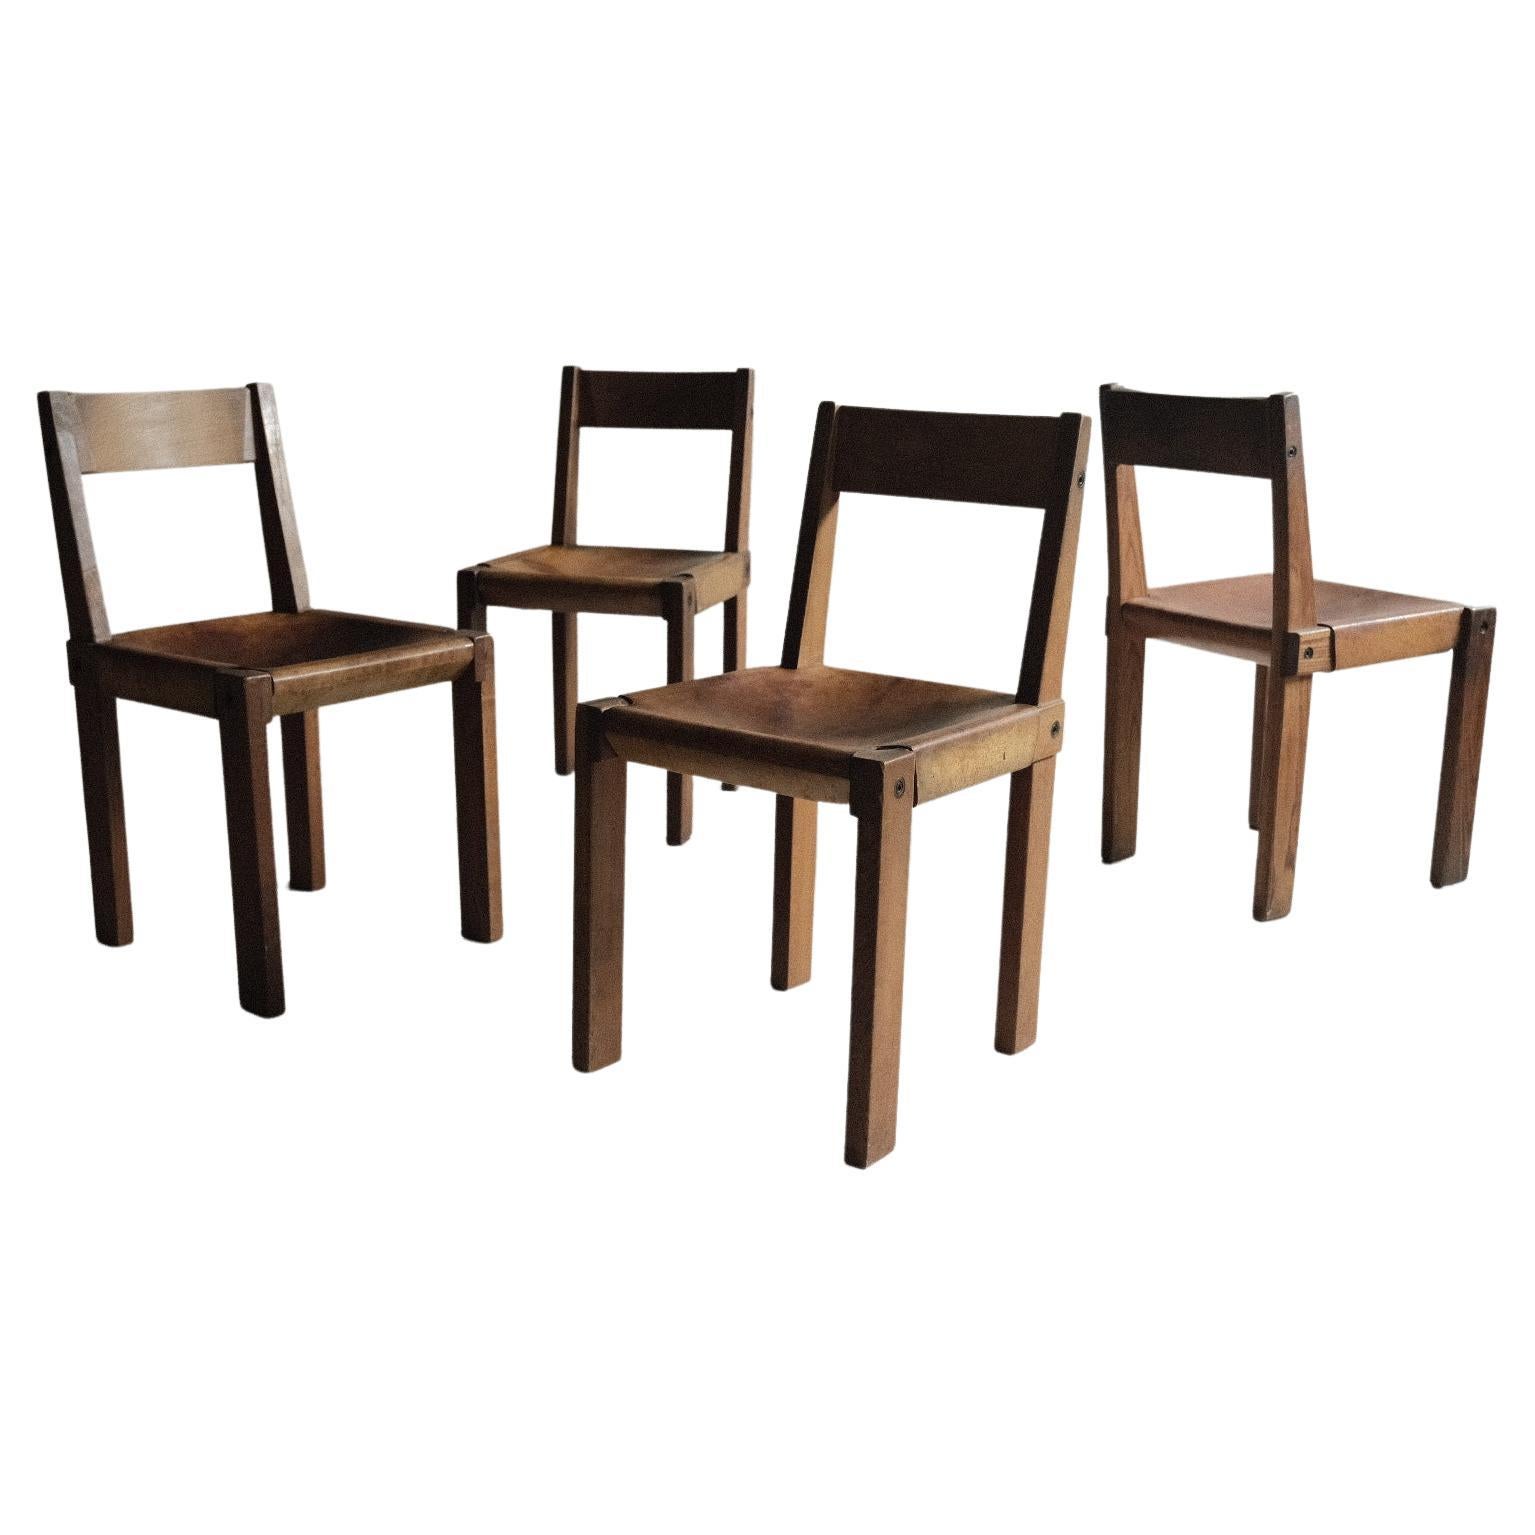 Four Vintage Dining Chairs by Pierre Chapo, Model No. S21, France, C. Late 1960s